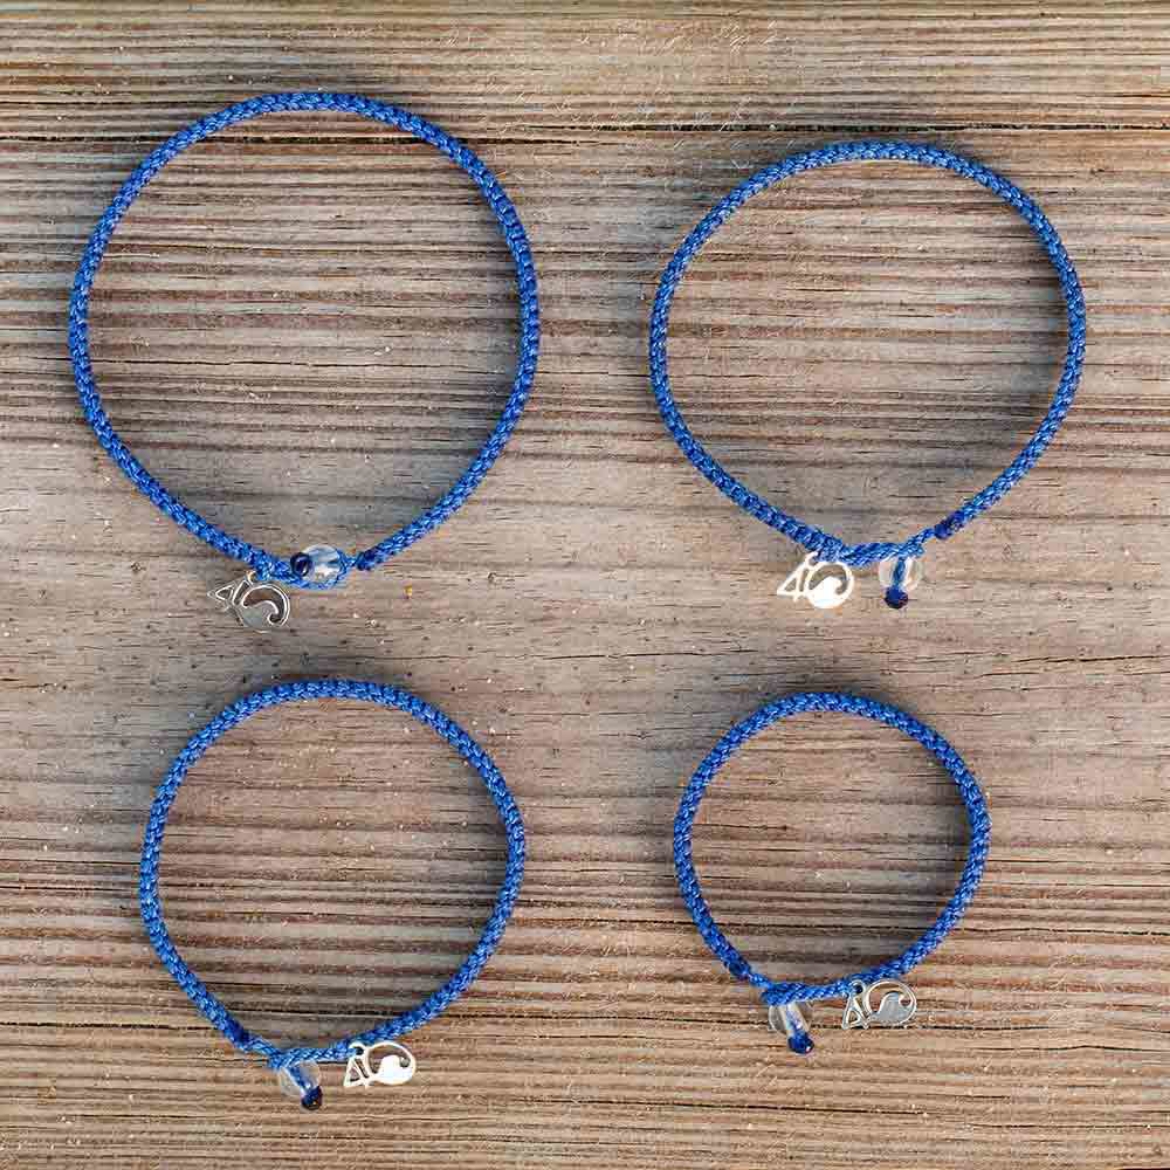 Picture of The 4Ocean Braided Bracelet